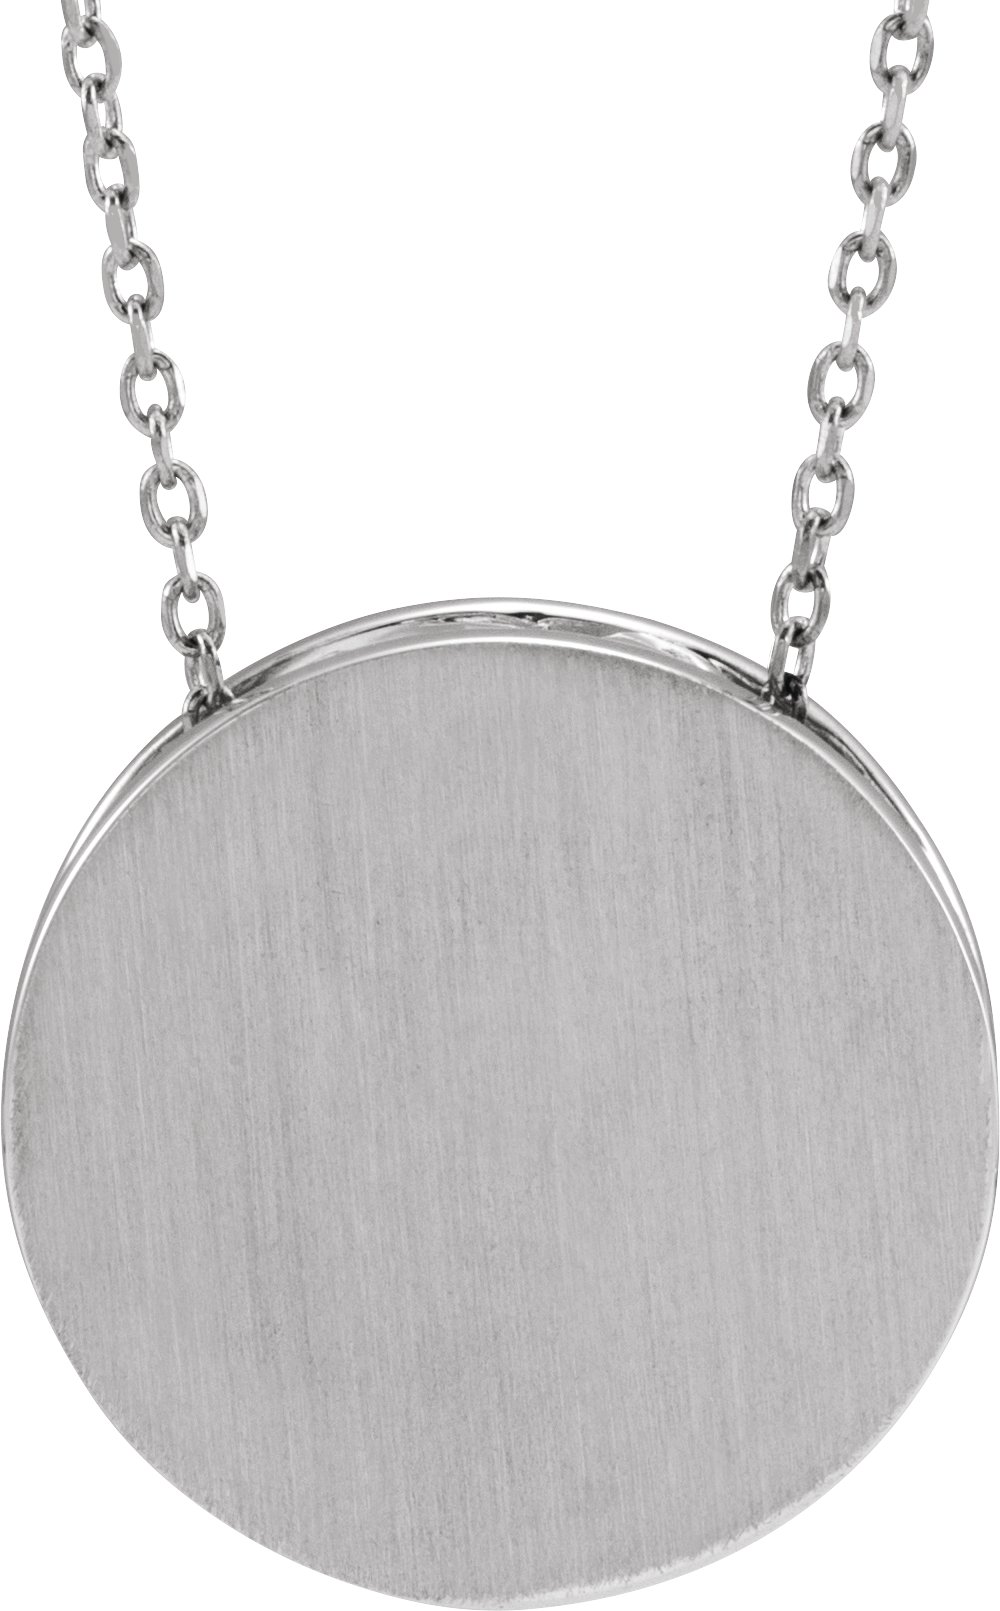 14K White 17 mm Engravable Scroll Disc 16-18" Necklace